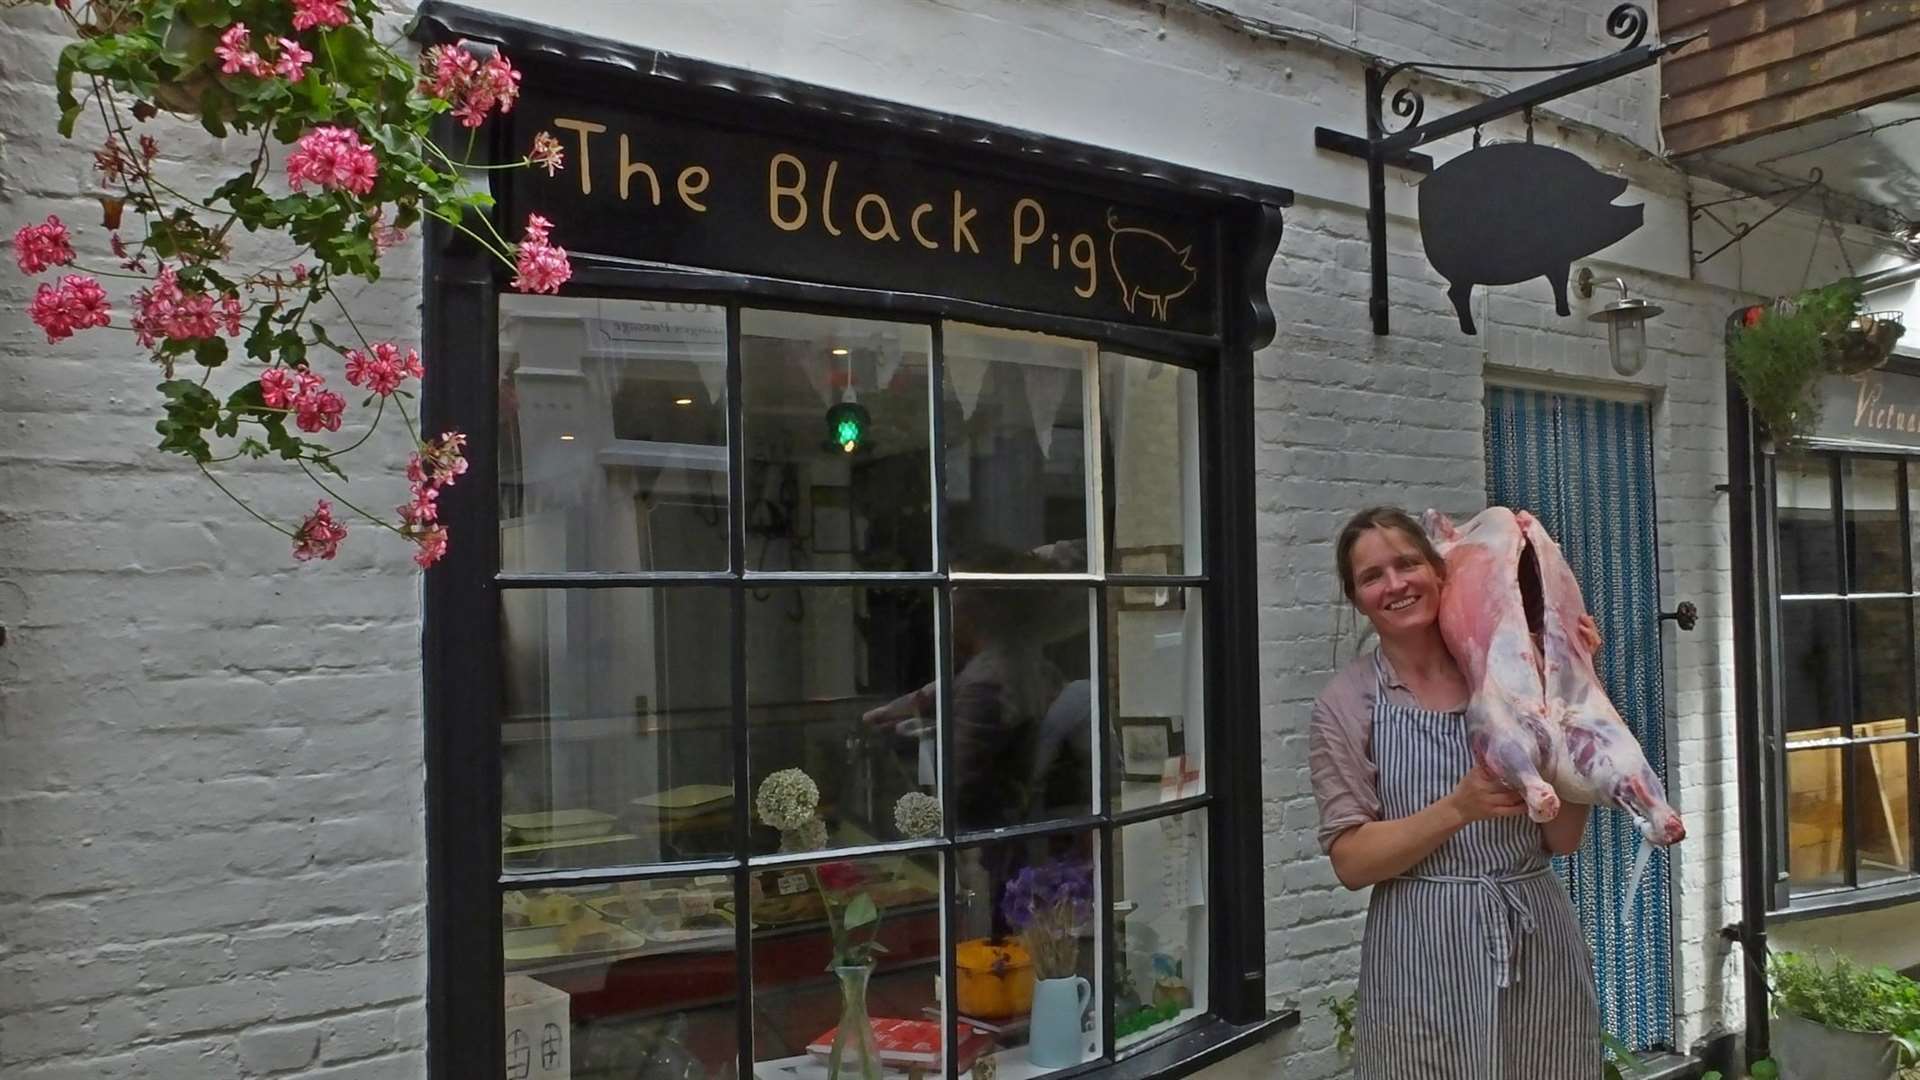 Lizzy Douglas opened The Black Pig in Deal in 2014